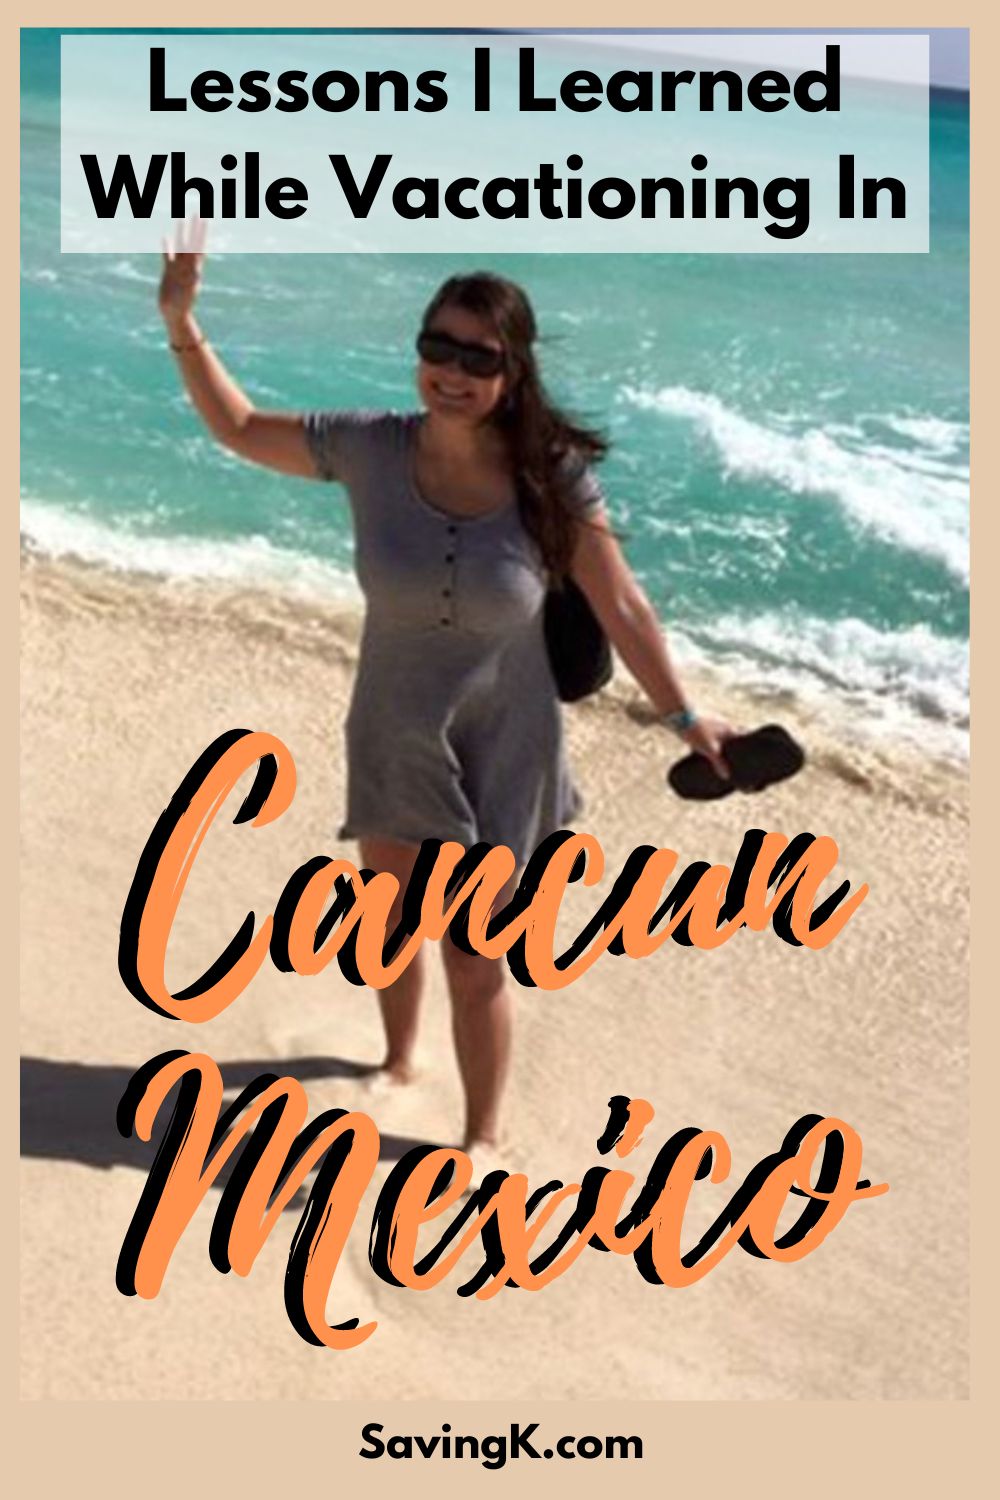 Lessons Learned While Vacationing In Cancun Mexico